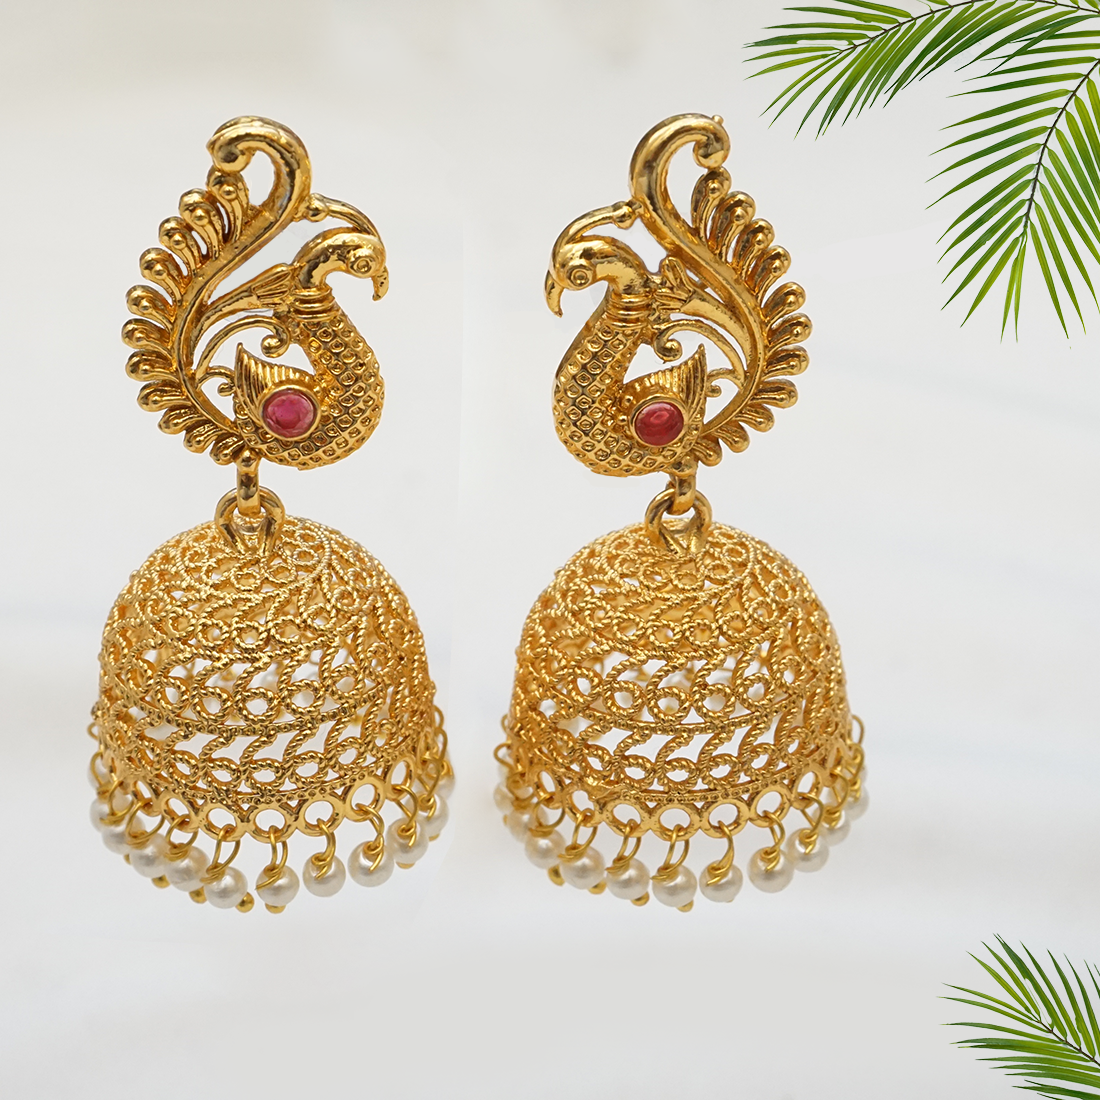 Experience the luxury of our premium quality earrings